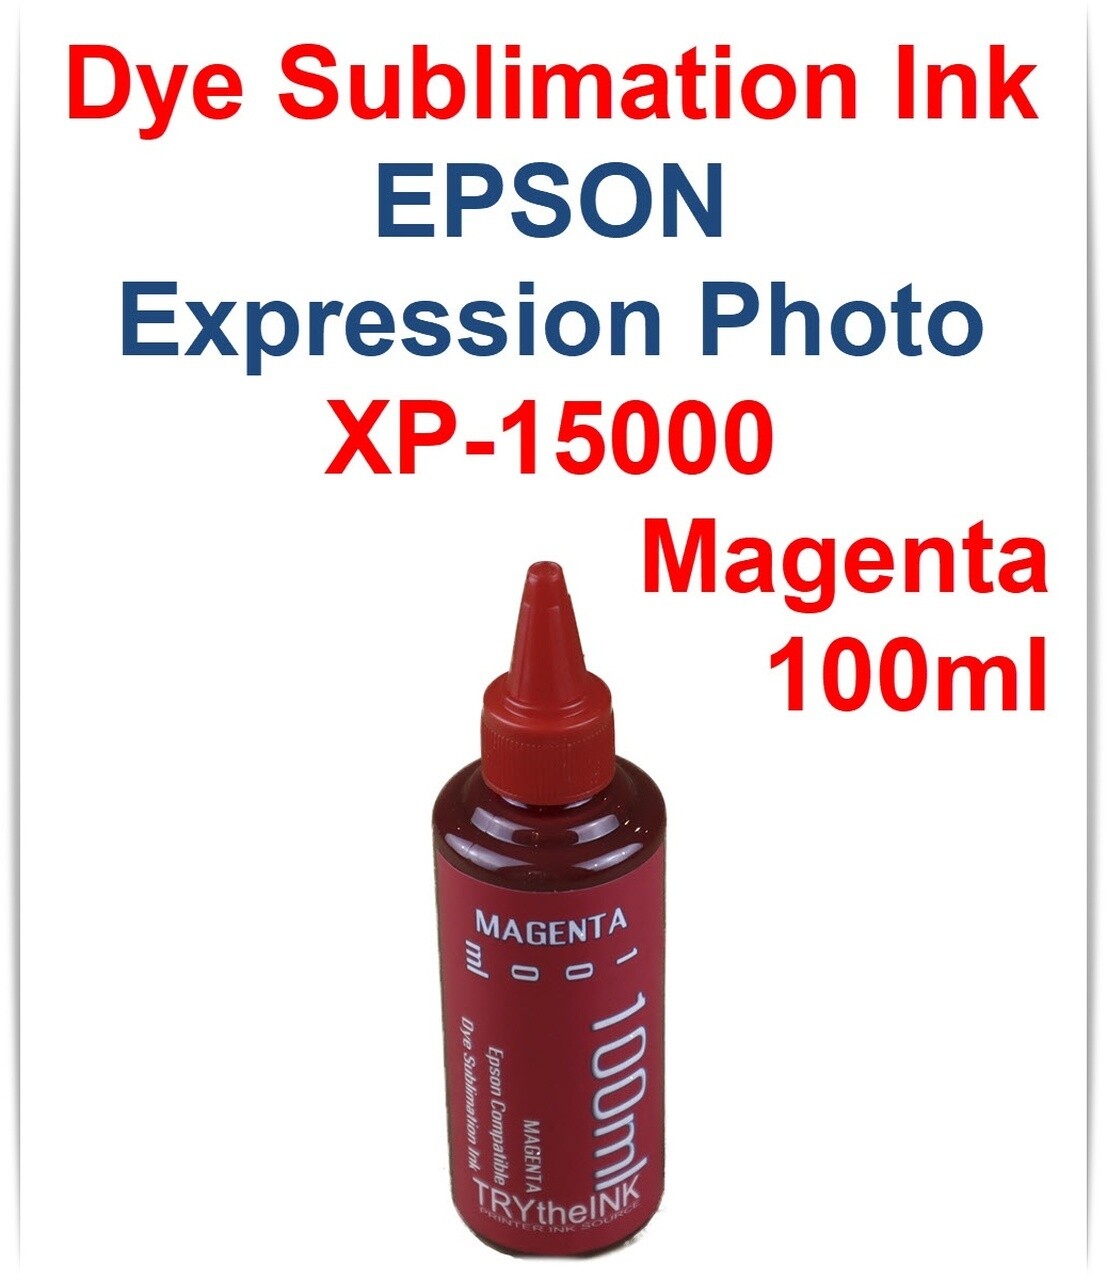 Magenta Dye Sublimation Ink 100ml for Epson Expression Photo HD XP-15000 printer